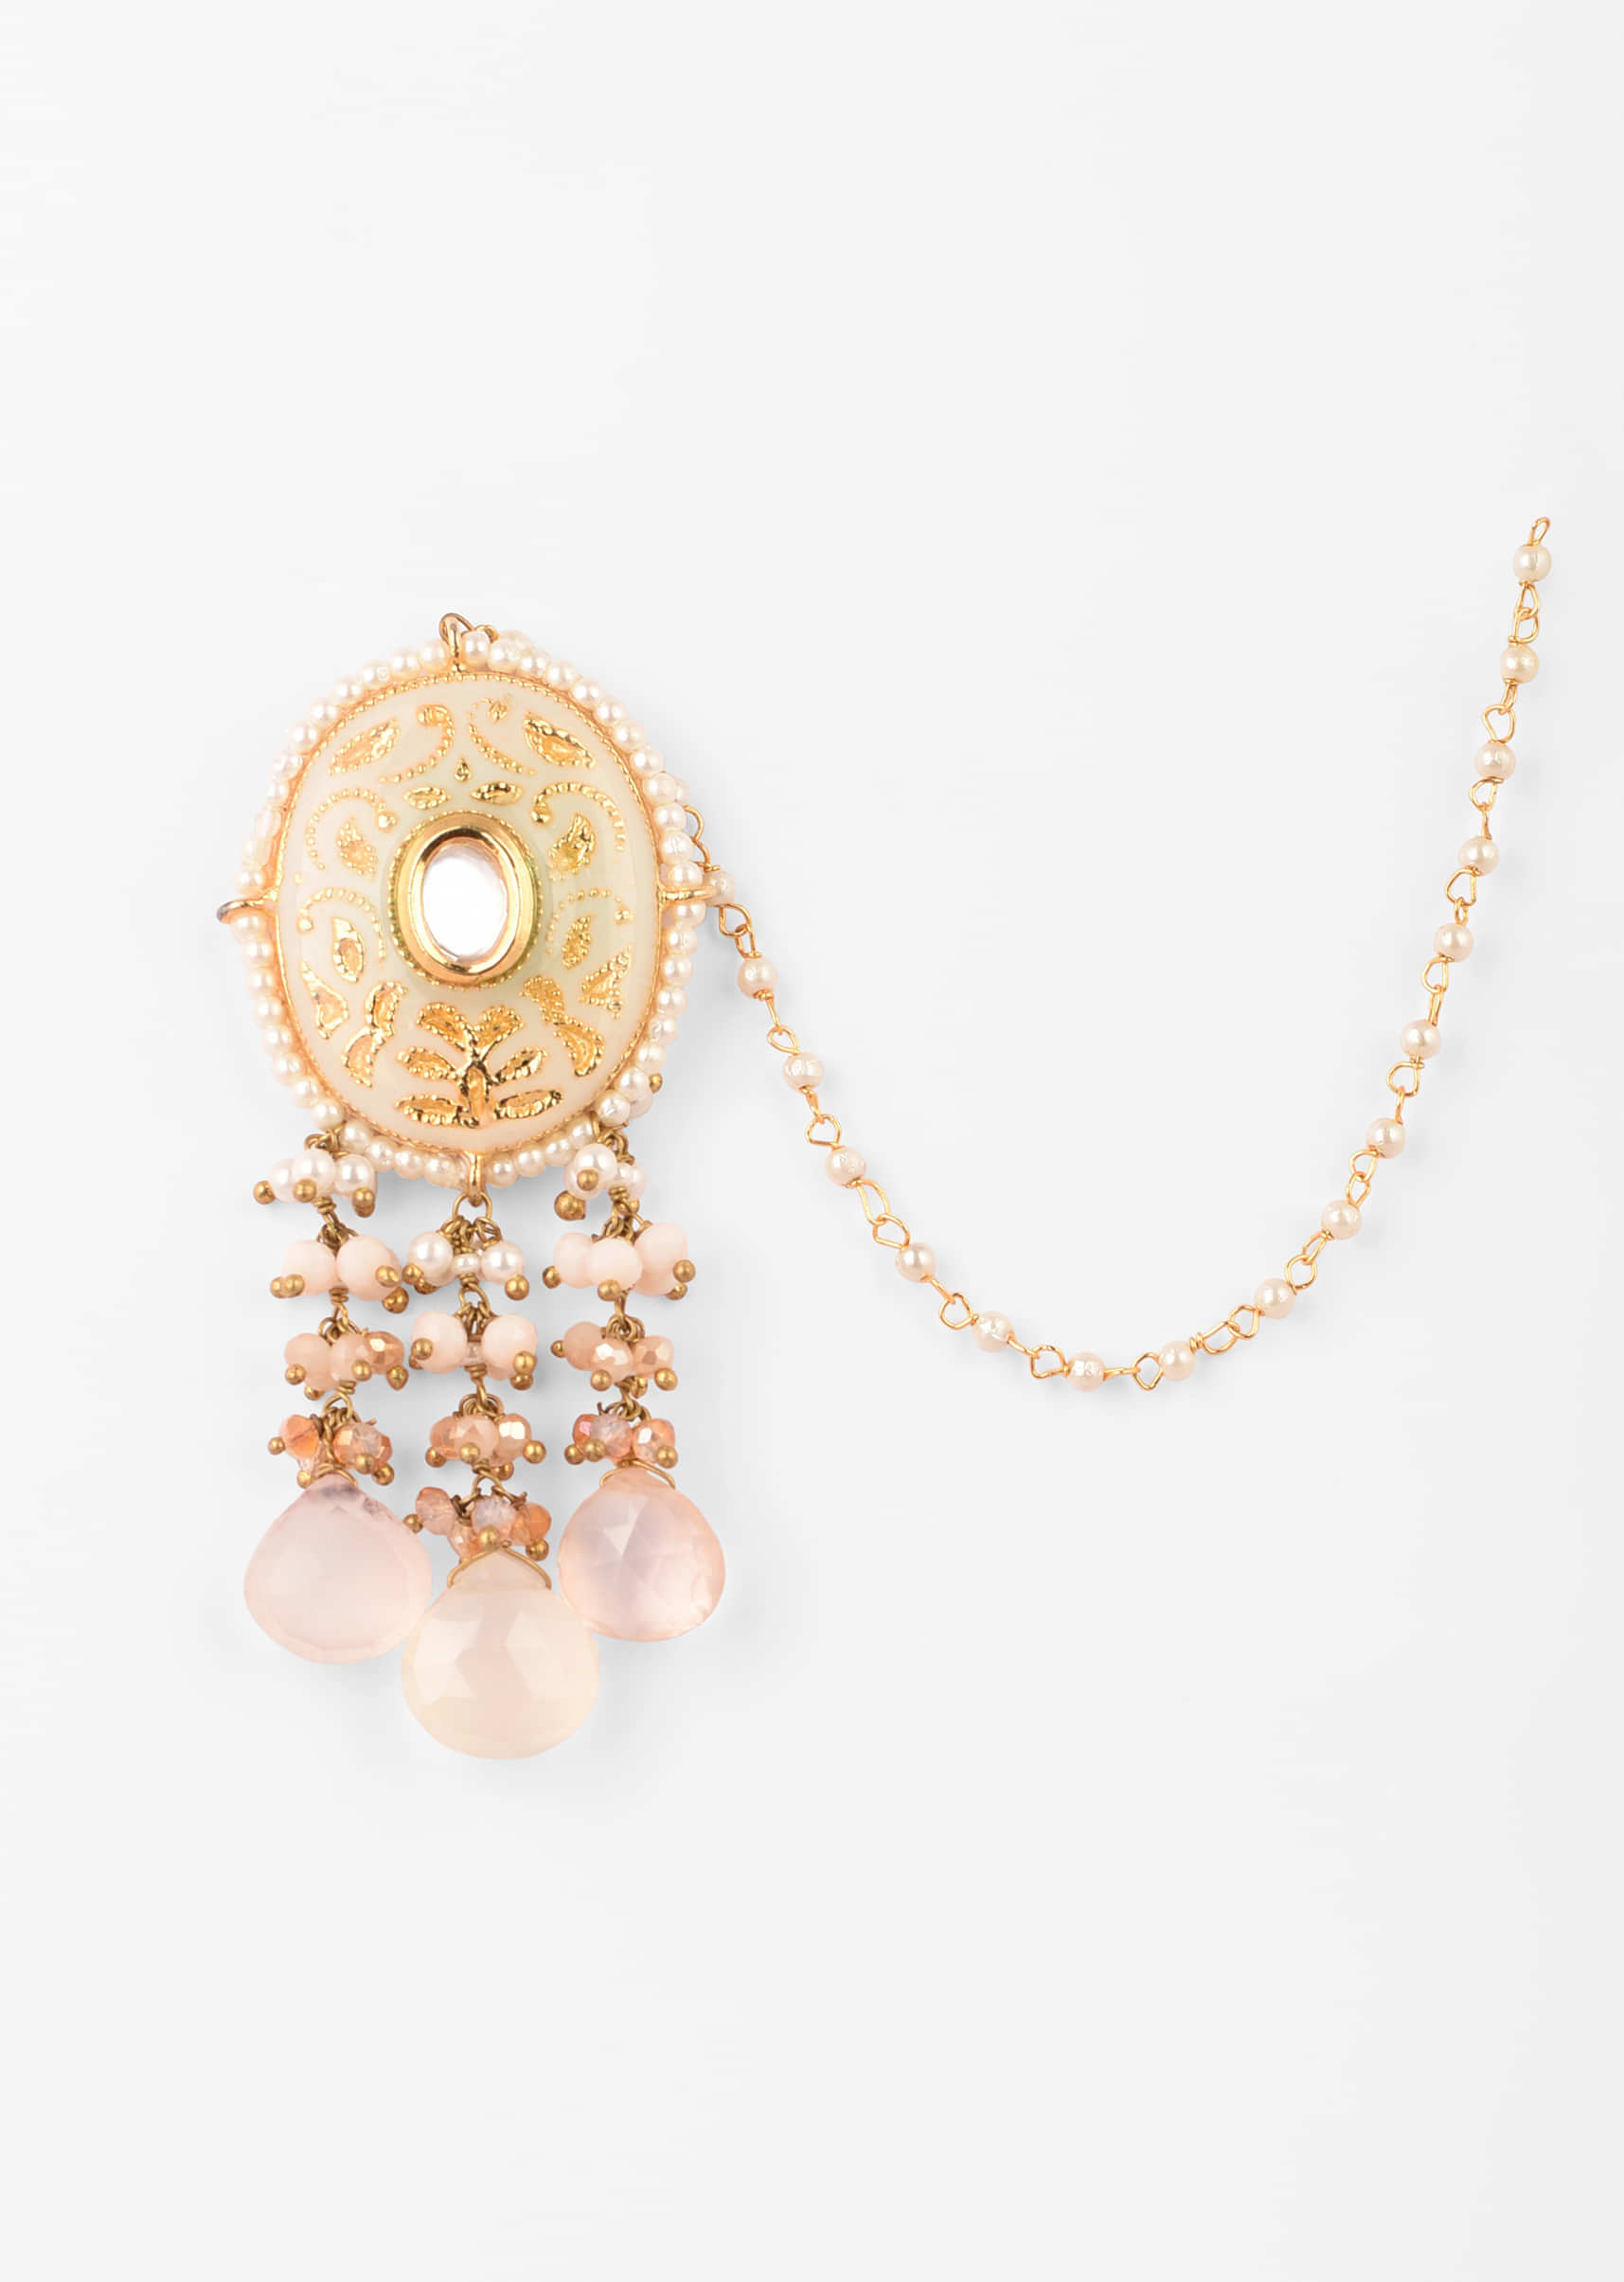 Cream Minakari Earrings In Oval Motif With Kundan And Dangling Moti And White Drop Fringes